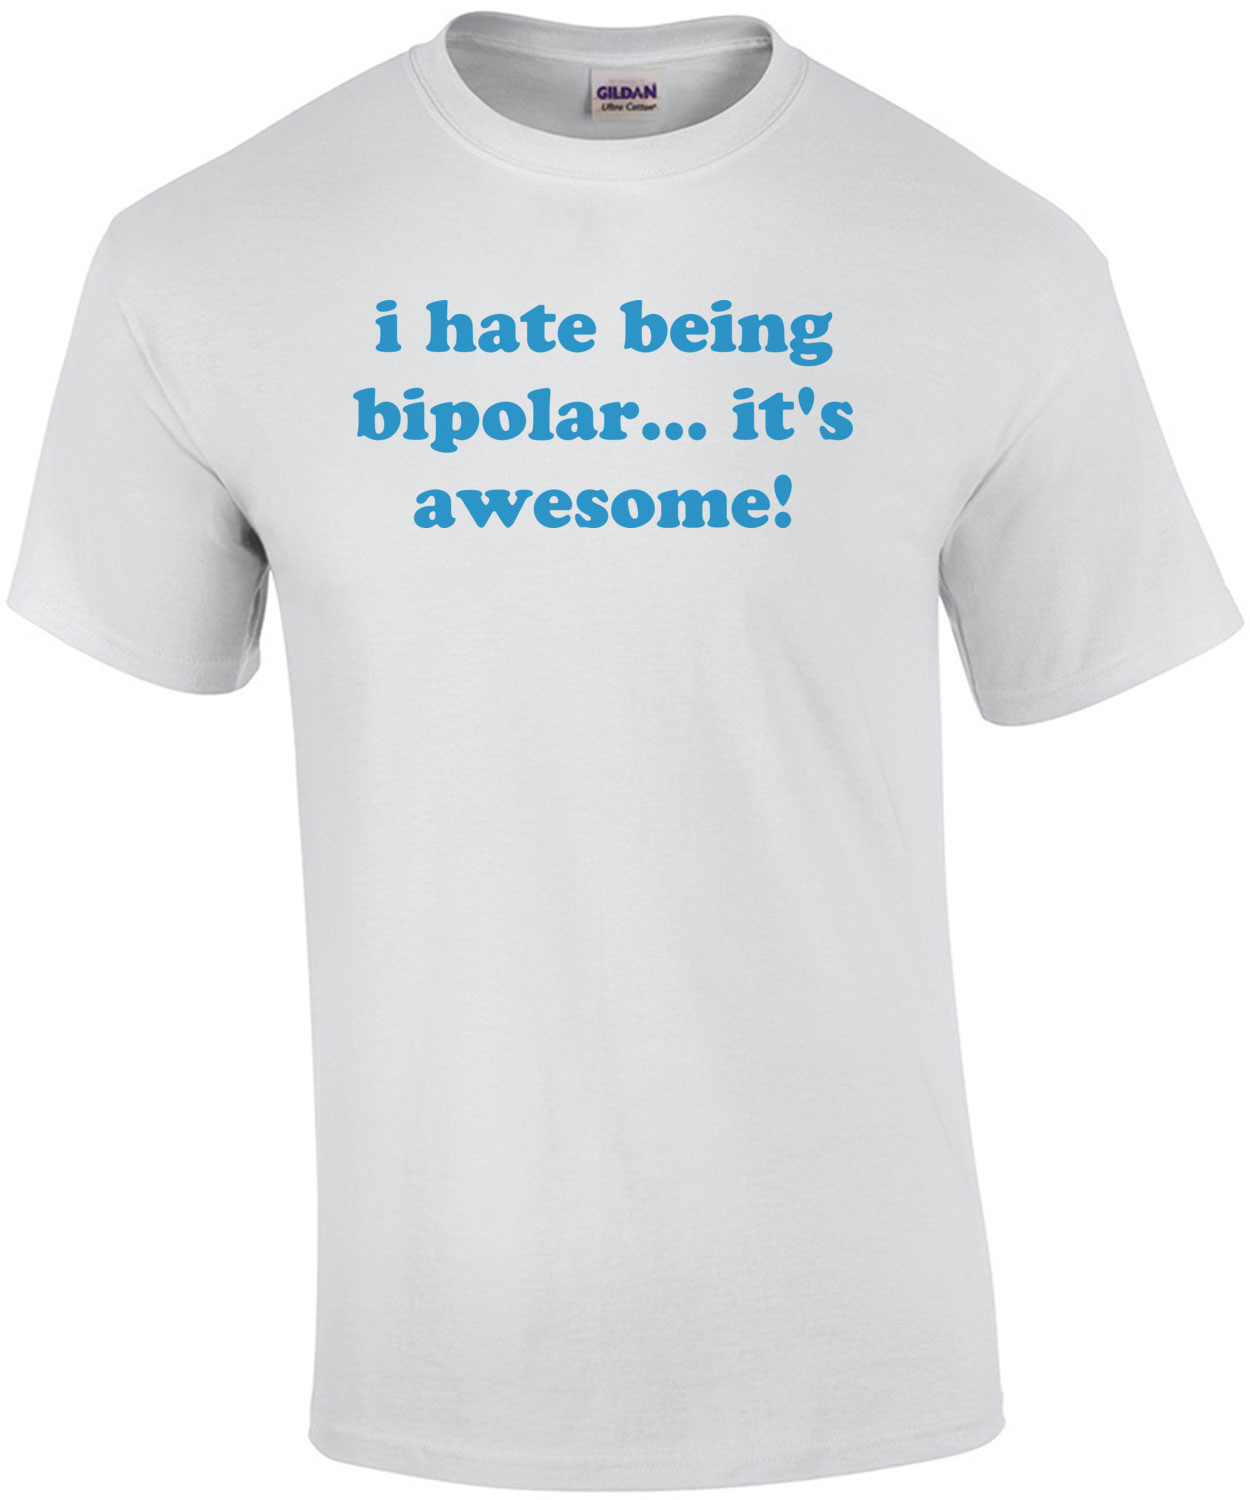 i hate being bipolar... it's awesome! Bipolar T-Shirt